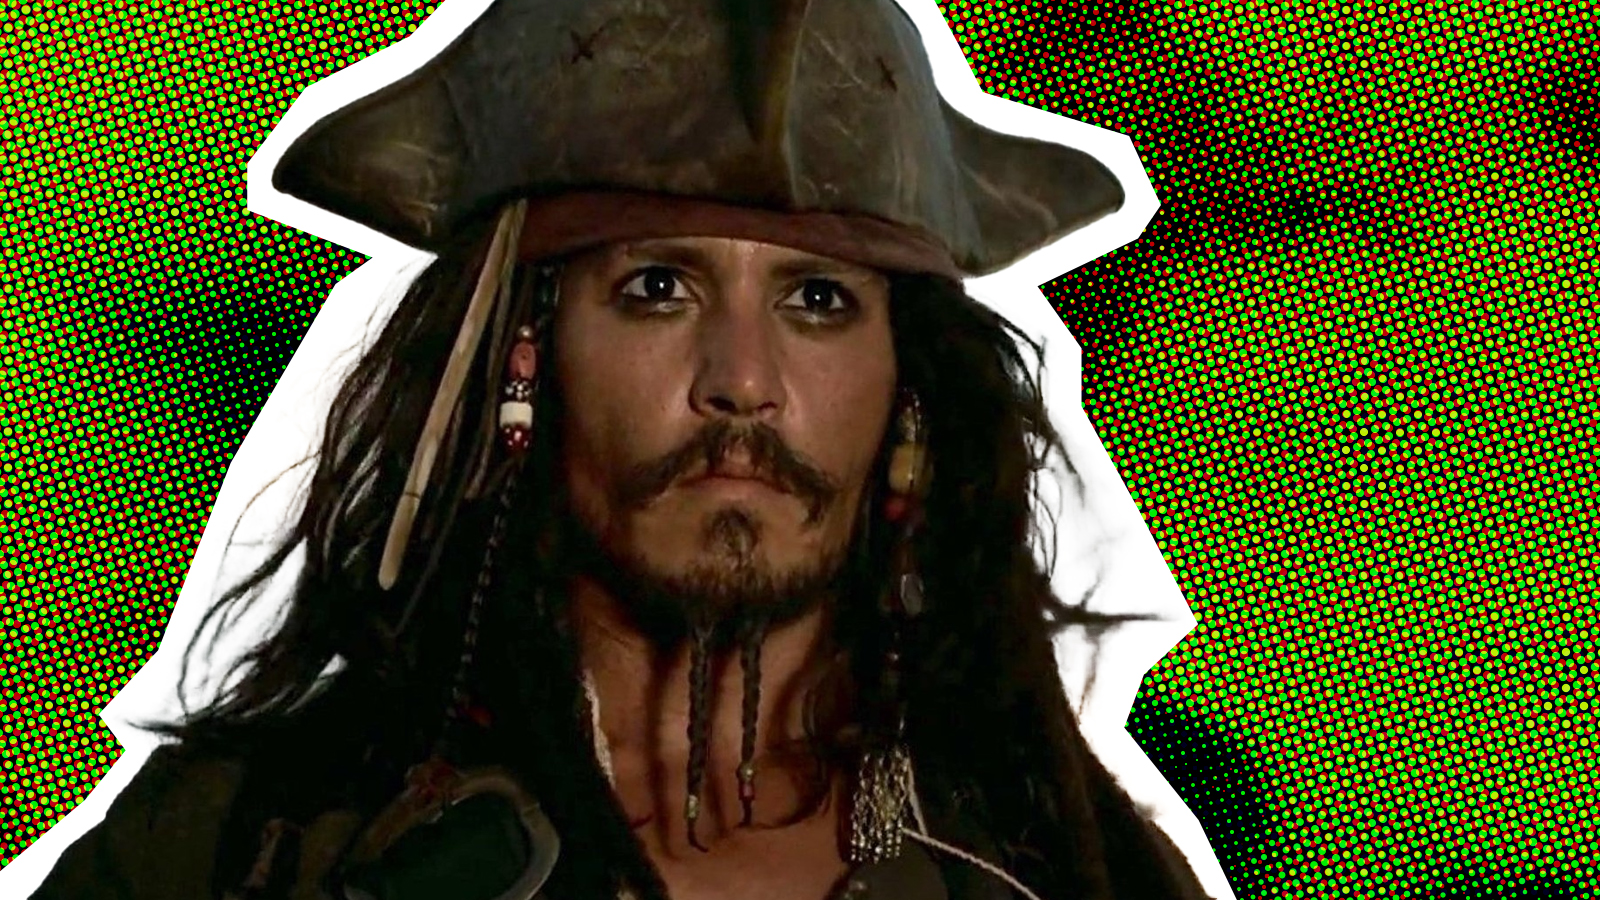 Johnny Depp May Return To Pirates Of The Caribbean, Producer Says